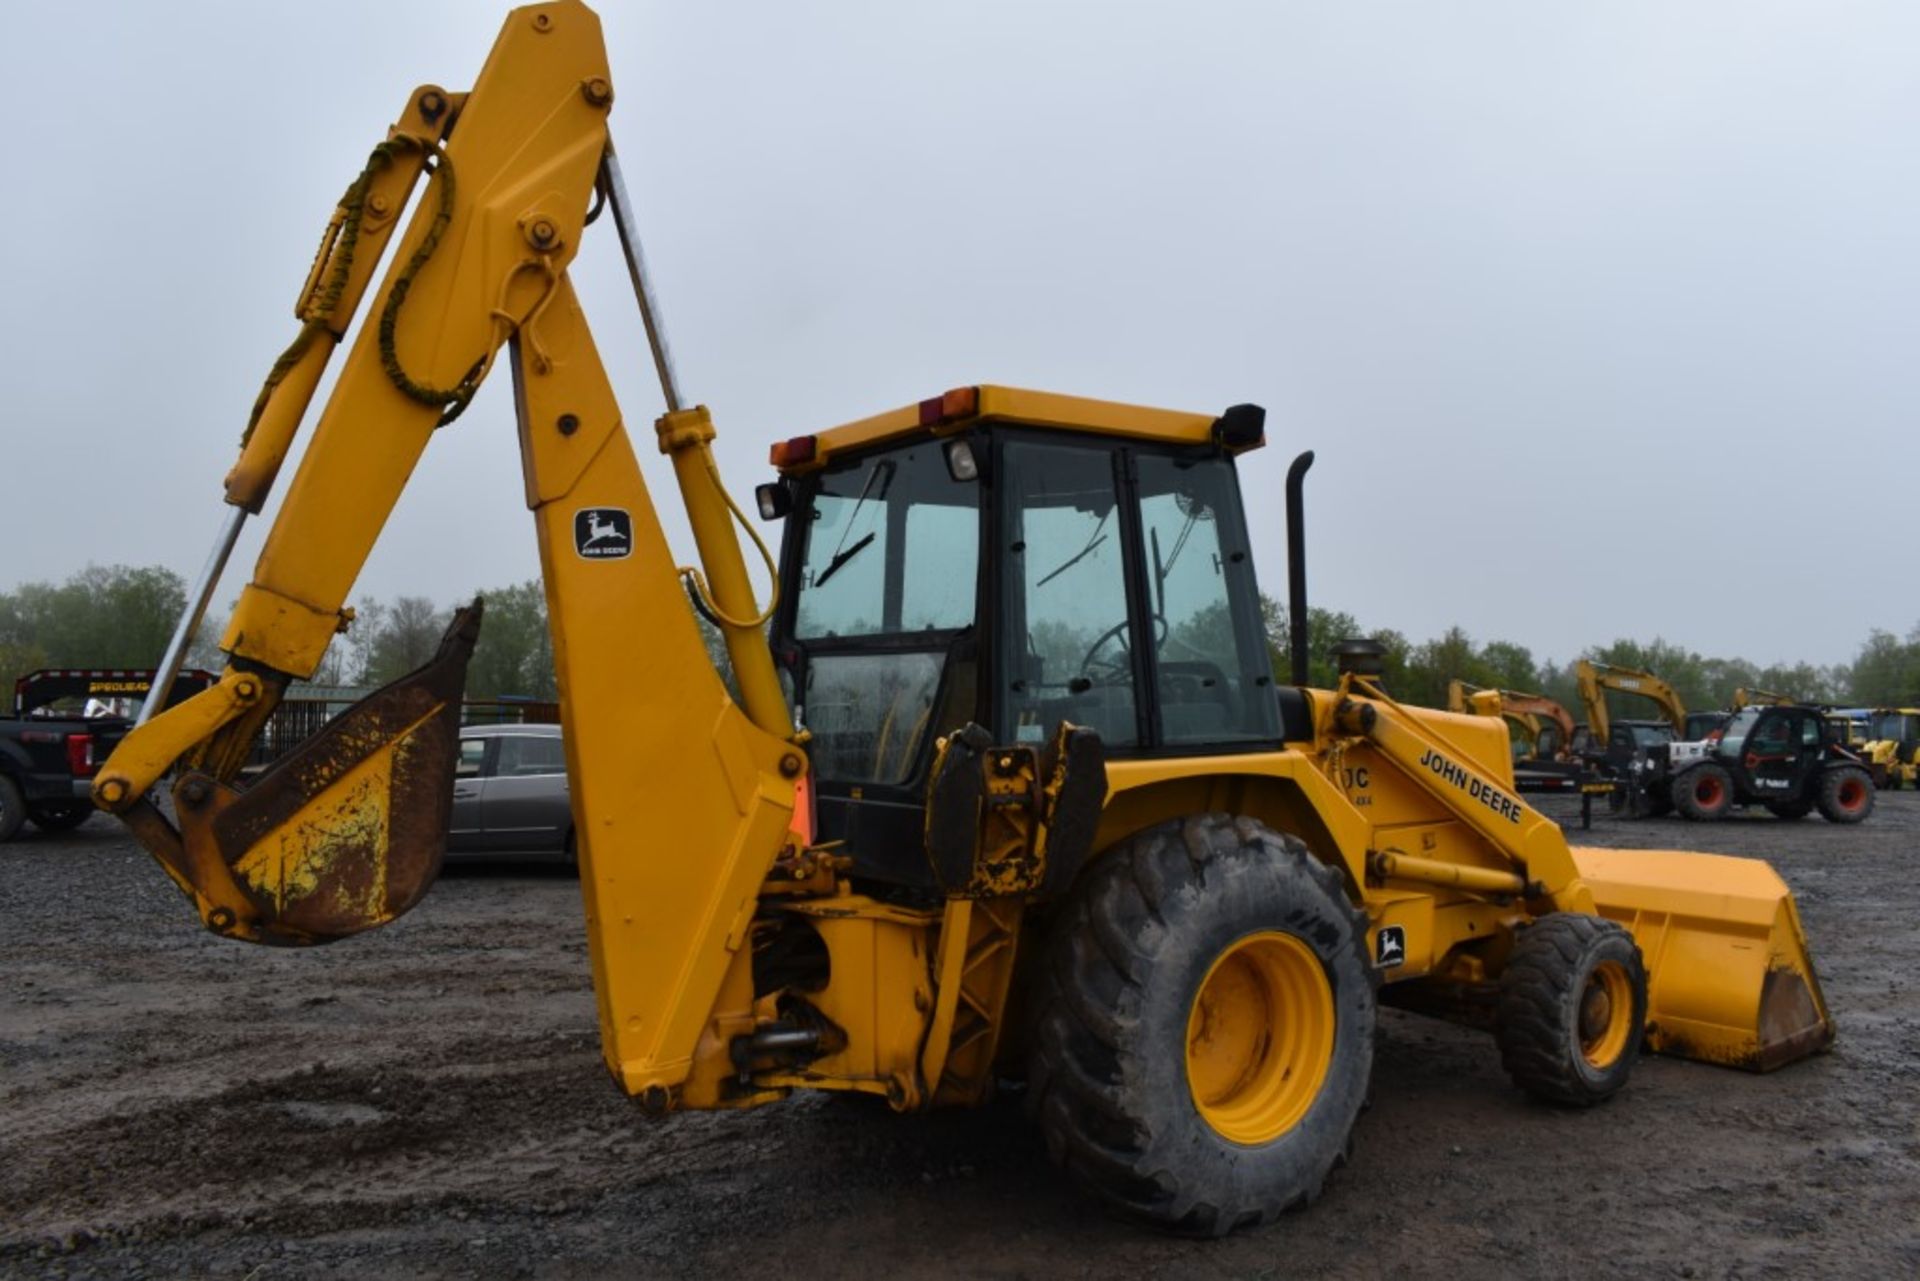 John Deere 510C Turbo Backhoe 5856 Hours, Runs and Operates, 4WD, 92" Bucket, Extendable Hoe, 24" - Image 4 of 33